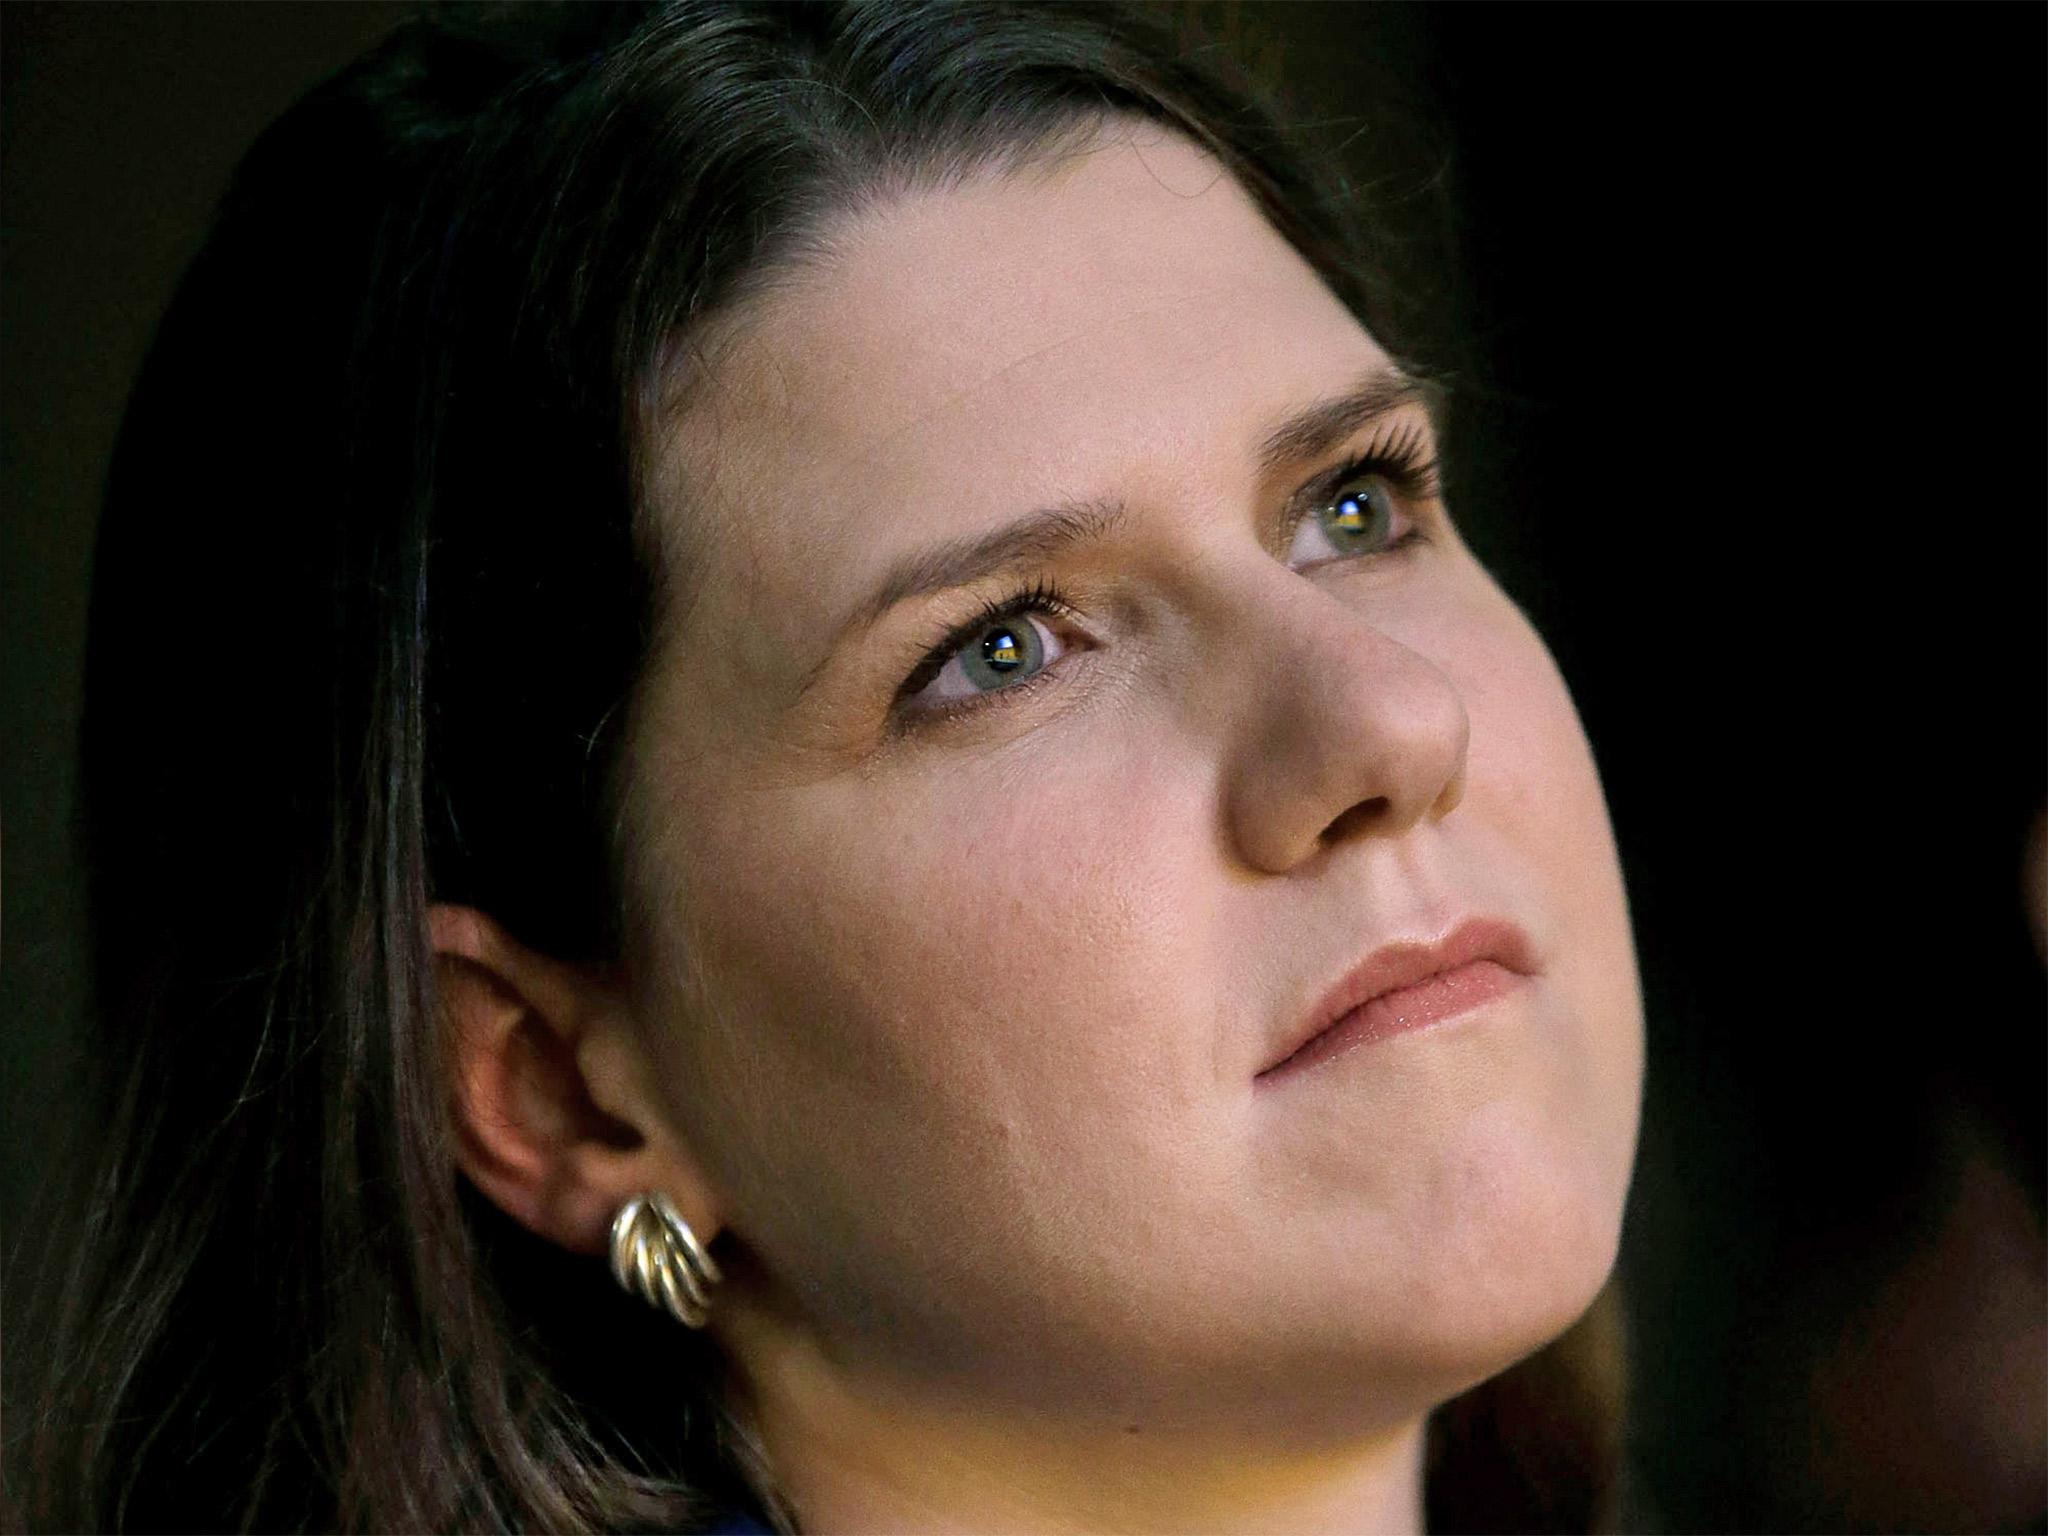 Jo Swinson has not confirmed she will stand for the Lib Dem leadership